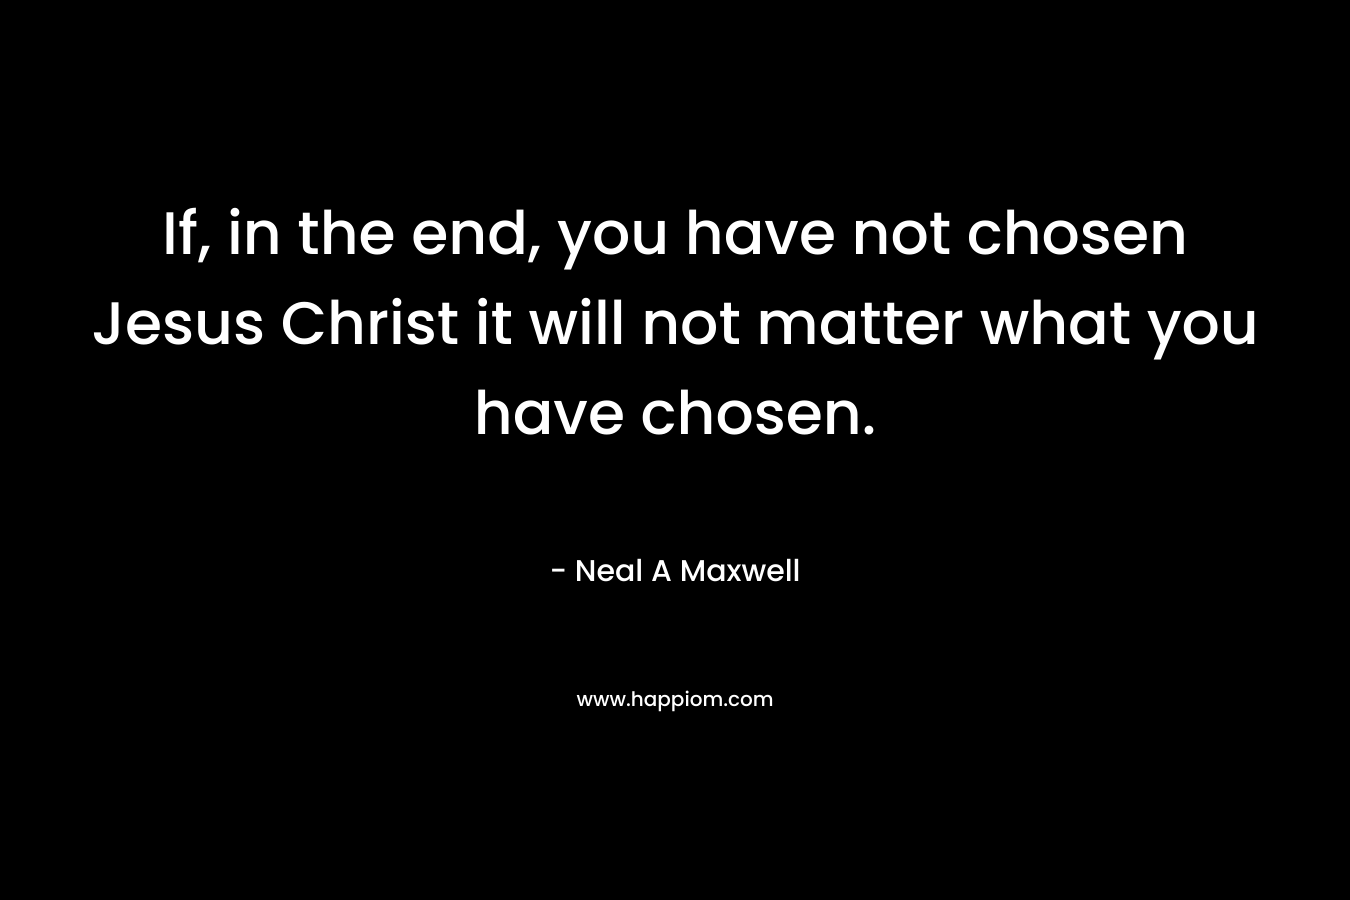 If, in the end, you have not chosen Jesus Christ it will not matter what you have chosen.